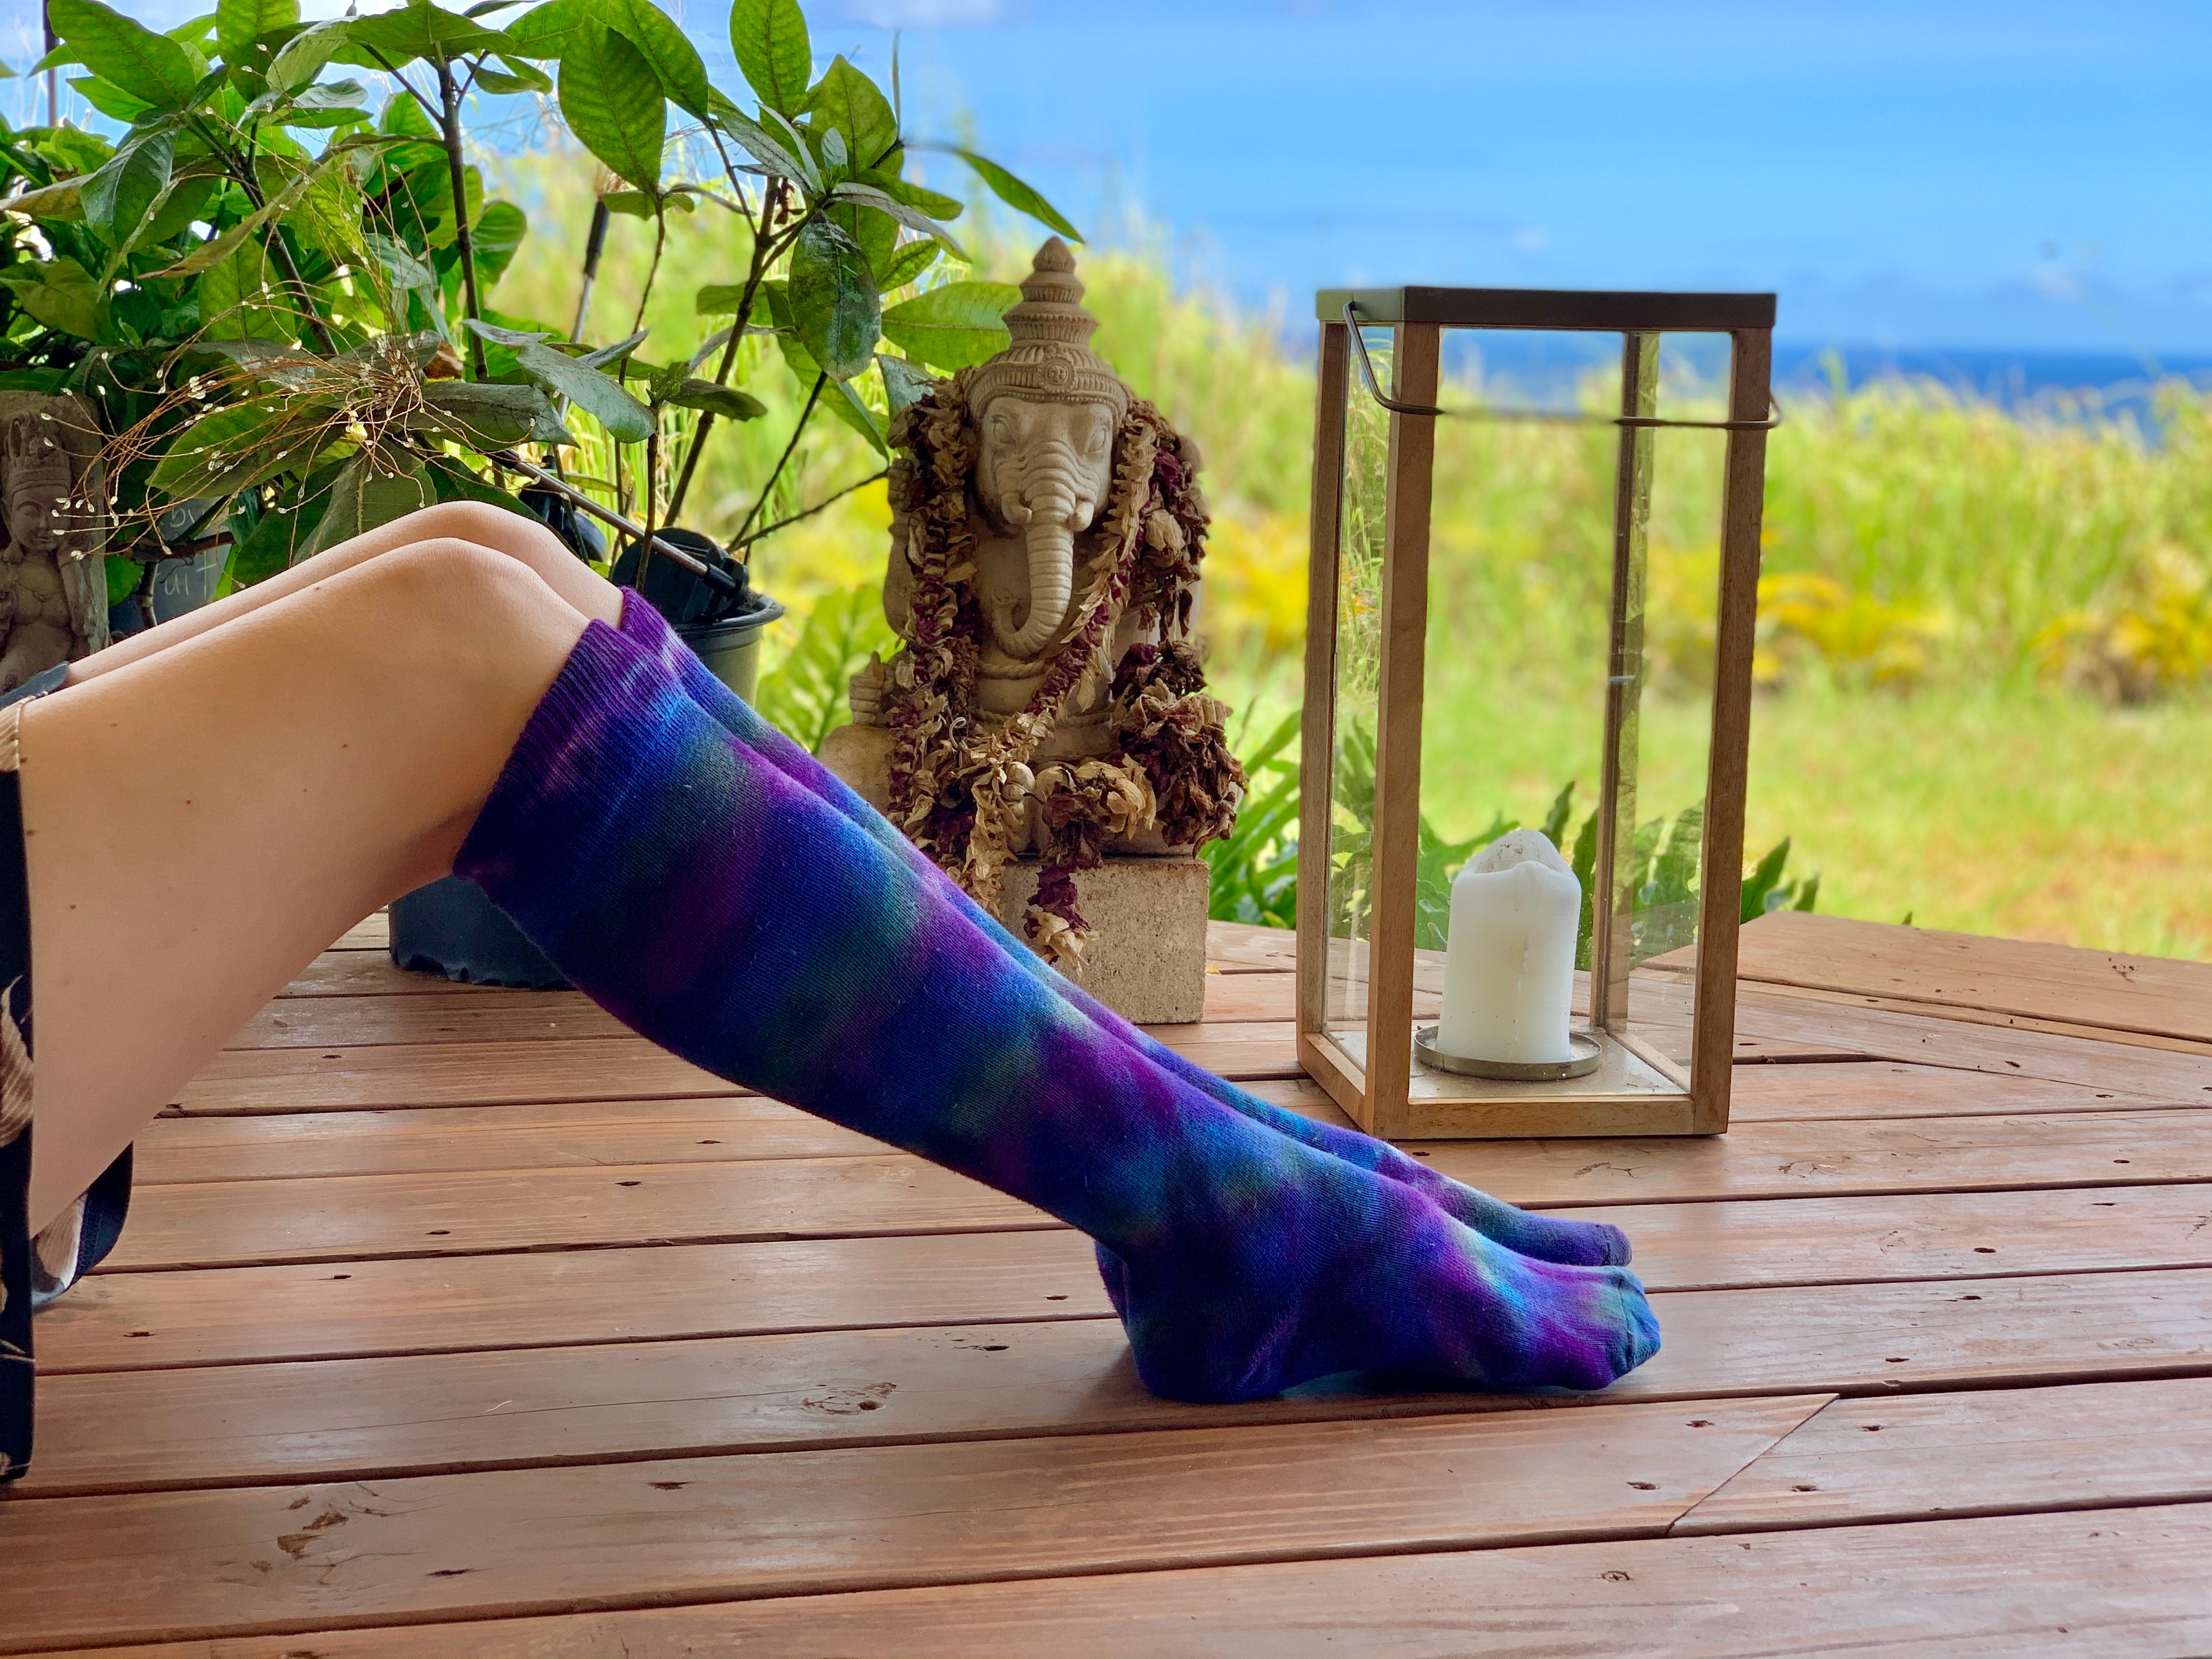 Limited Edition Organic Cotton Socks Hand Dyed in small batches by RocknSocks. Seasonally made, unique tie dye socks using our quality American made organic cotton blanks.